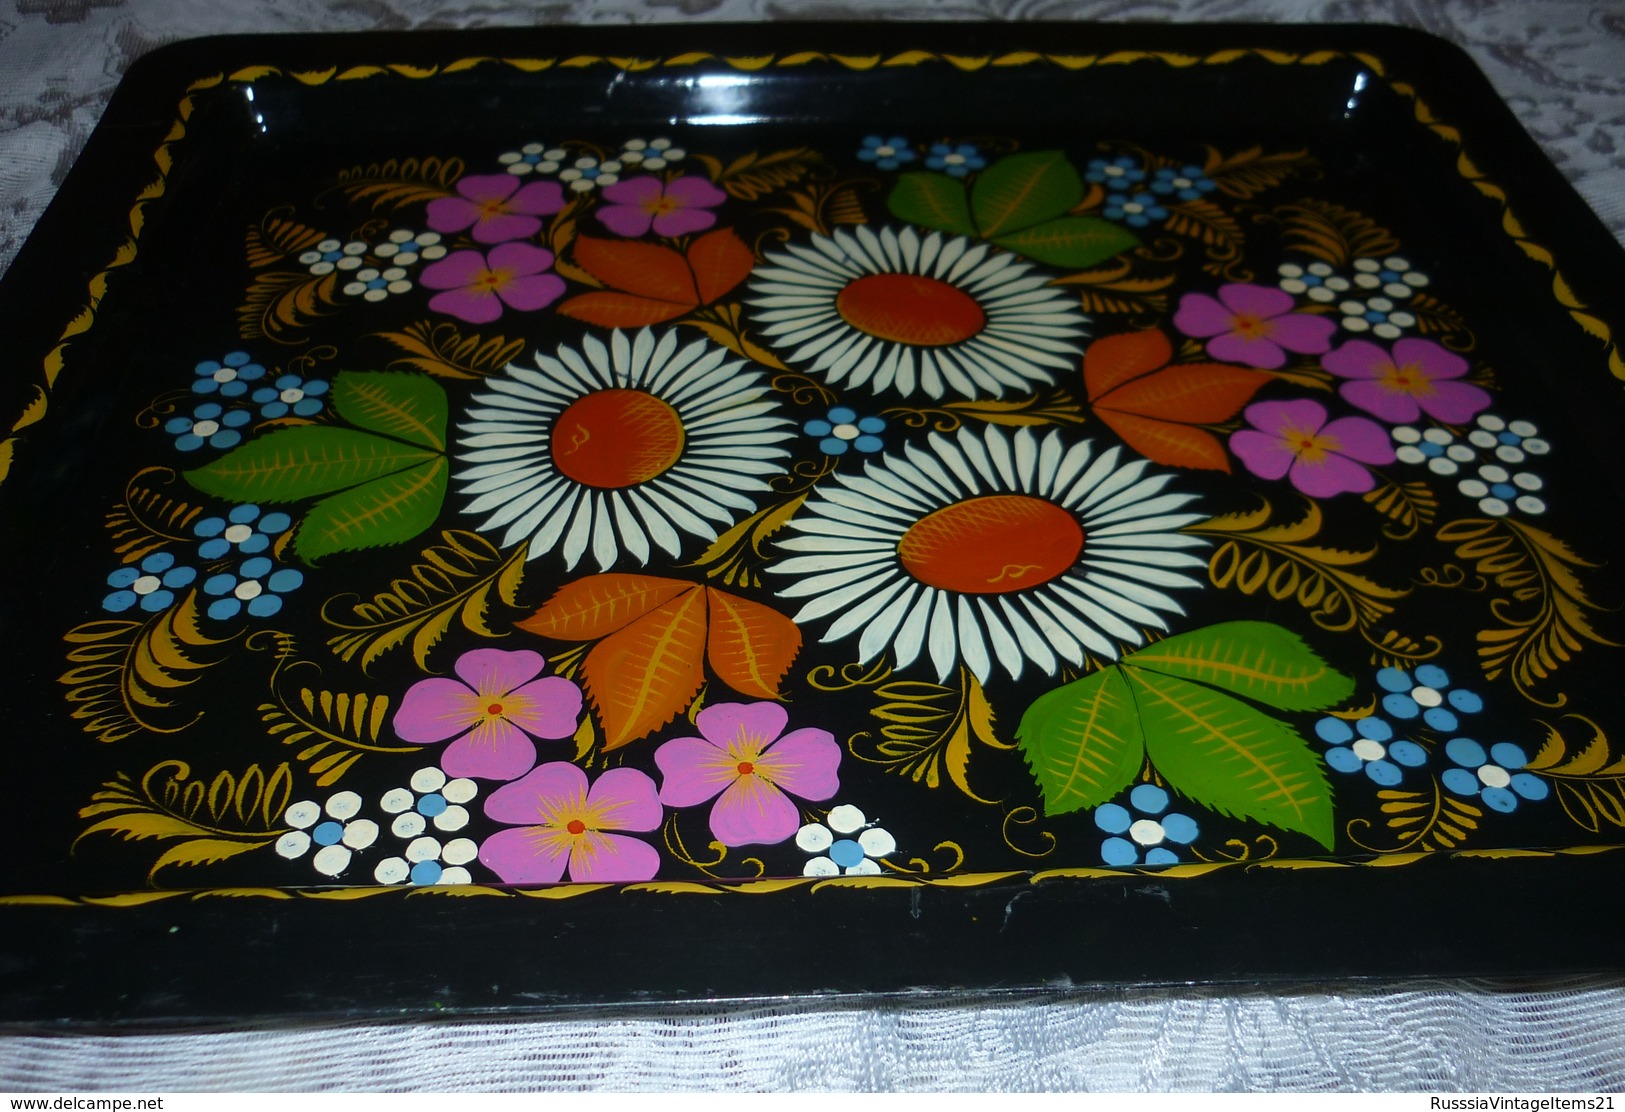 Vintage Russian (USSR) metal plate - tray // hand-painted